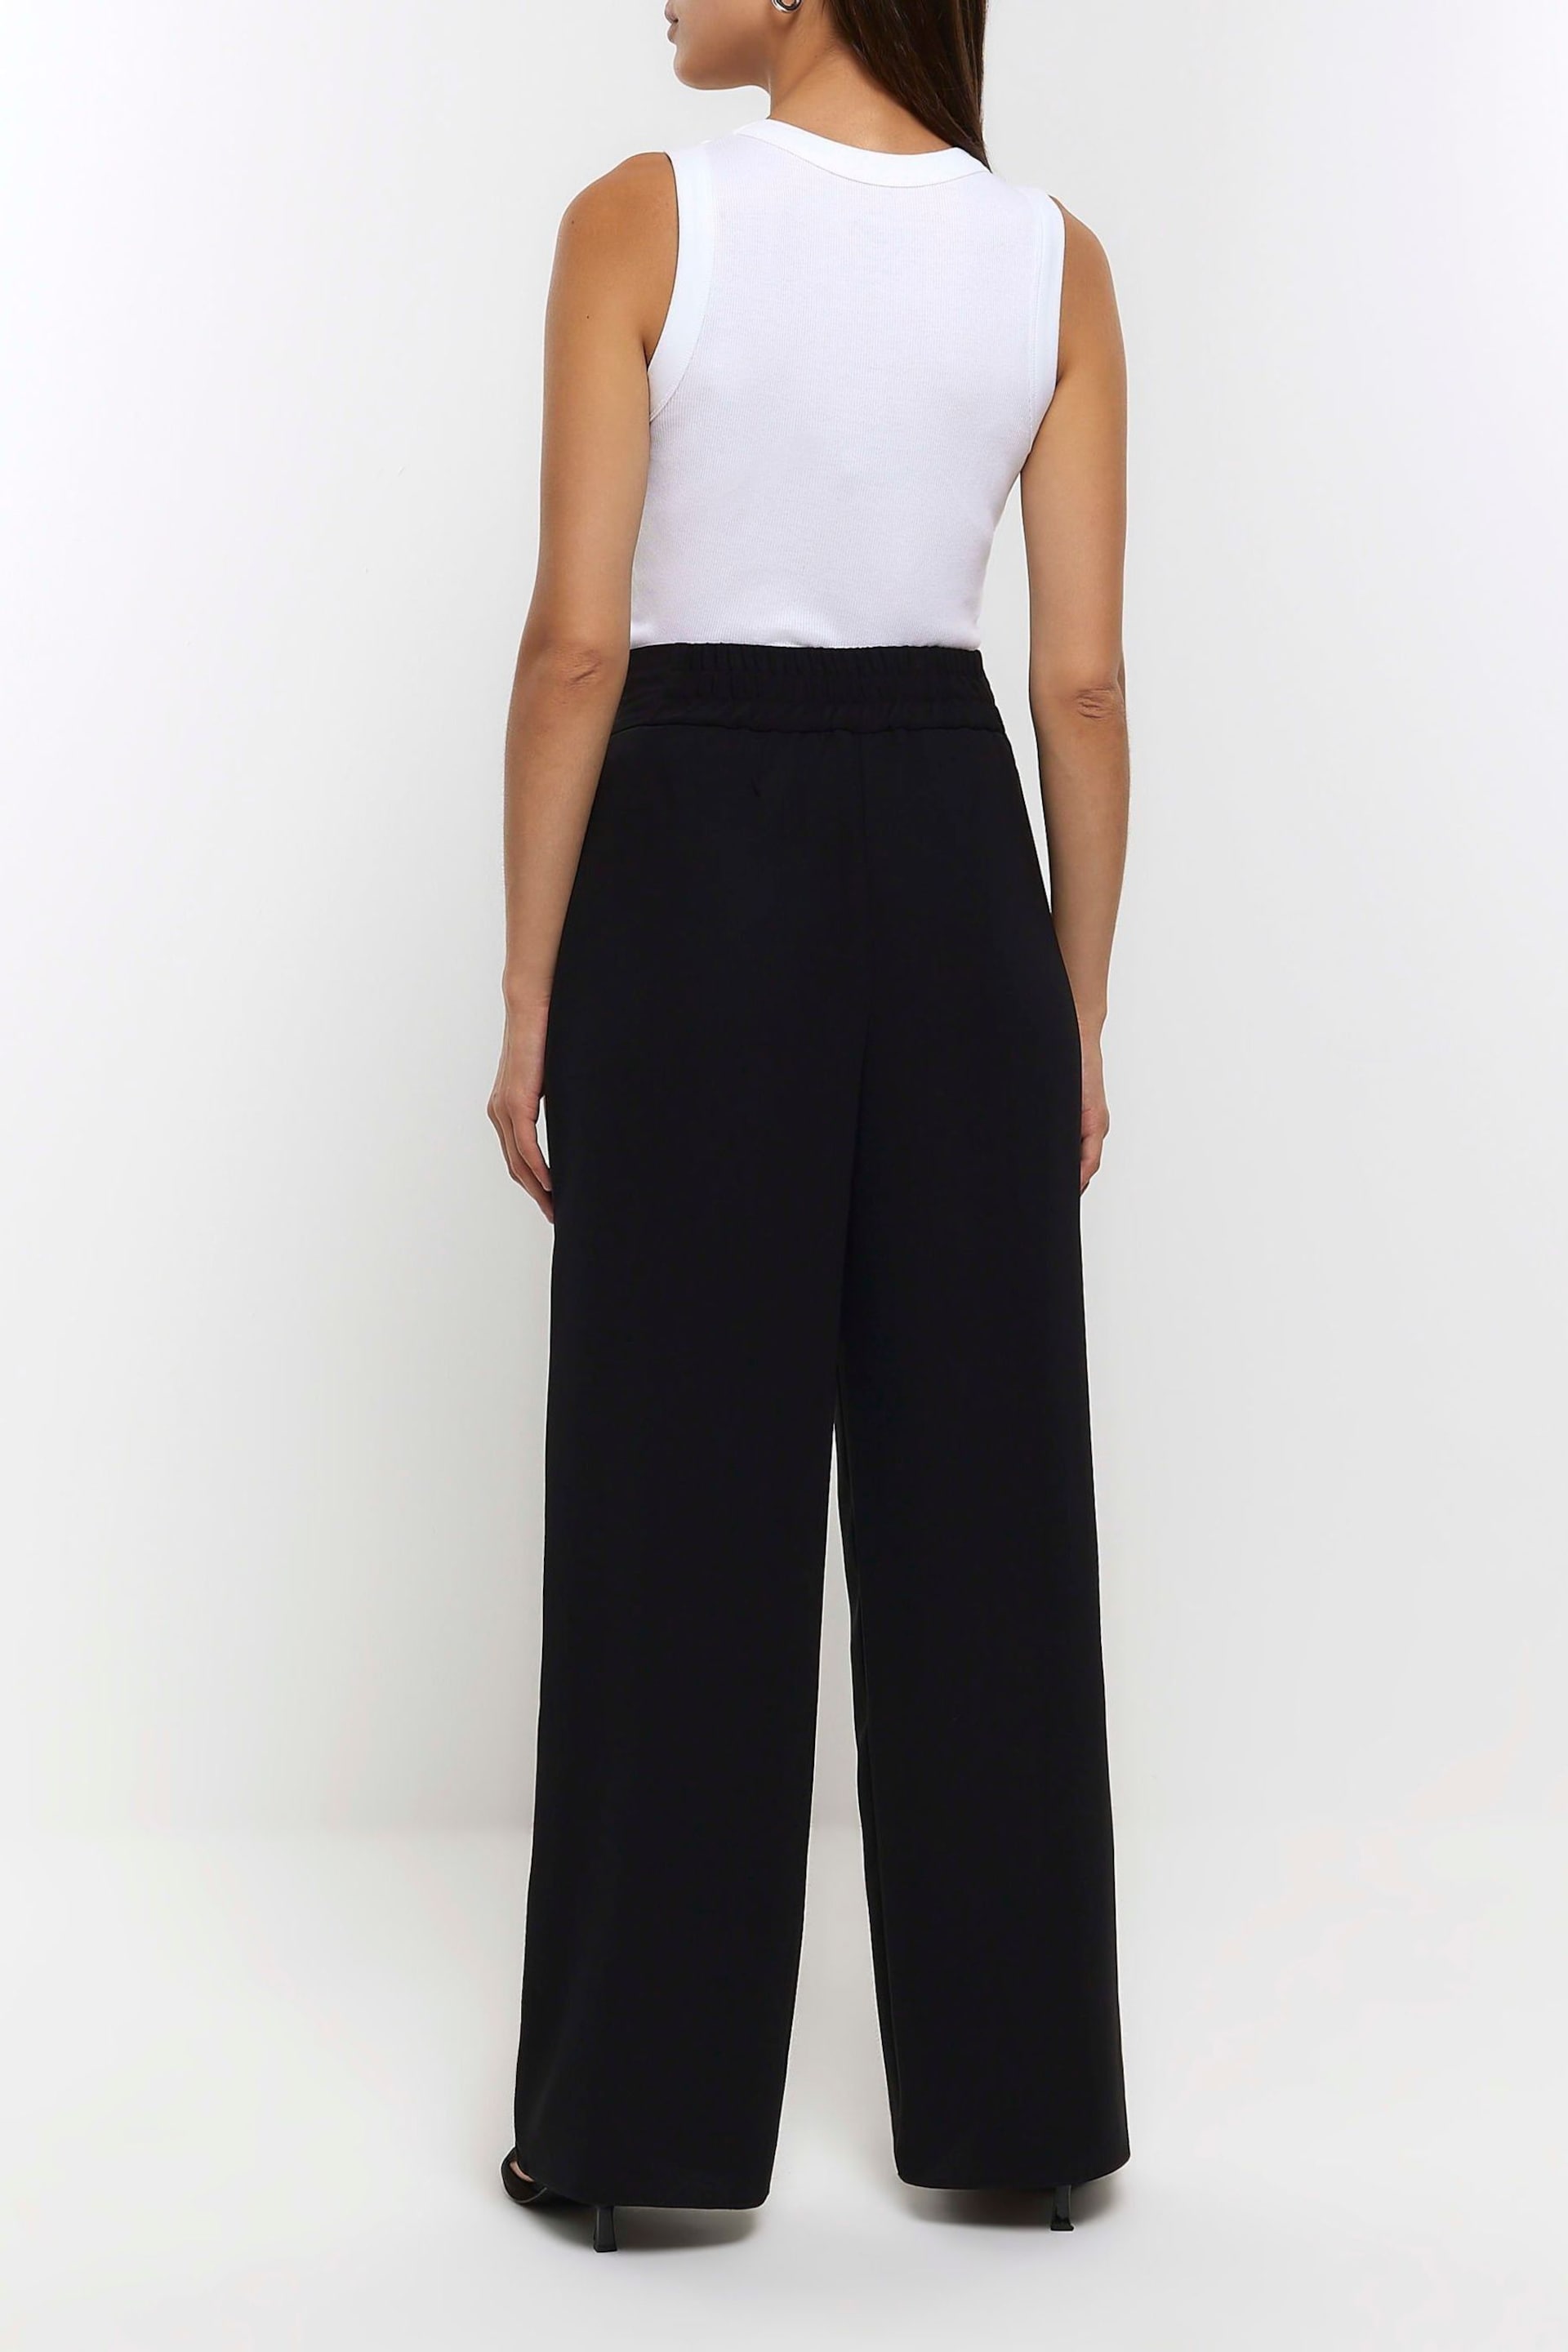 River Island Black Wide Leg Pleated Trousers - Image 2 of 5